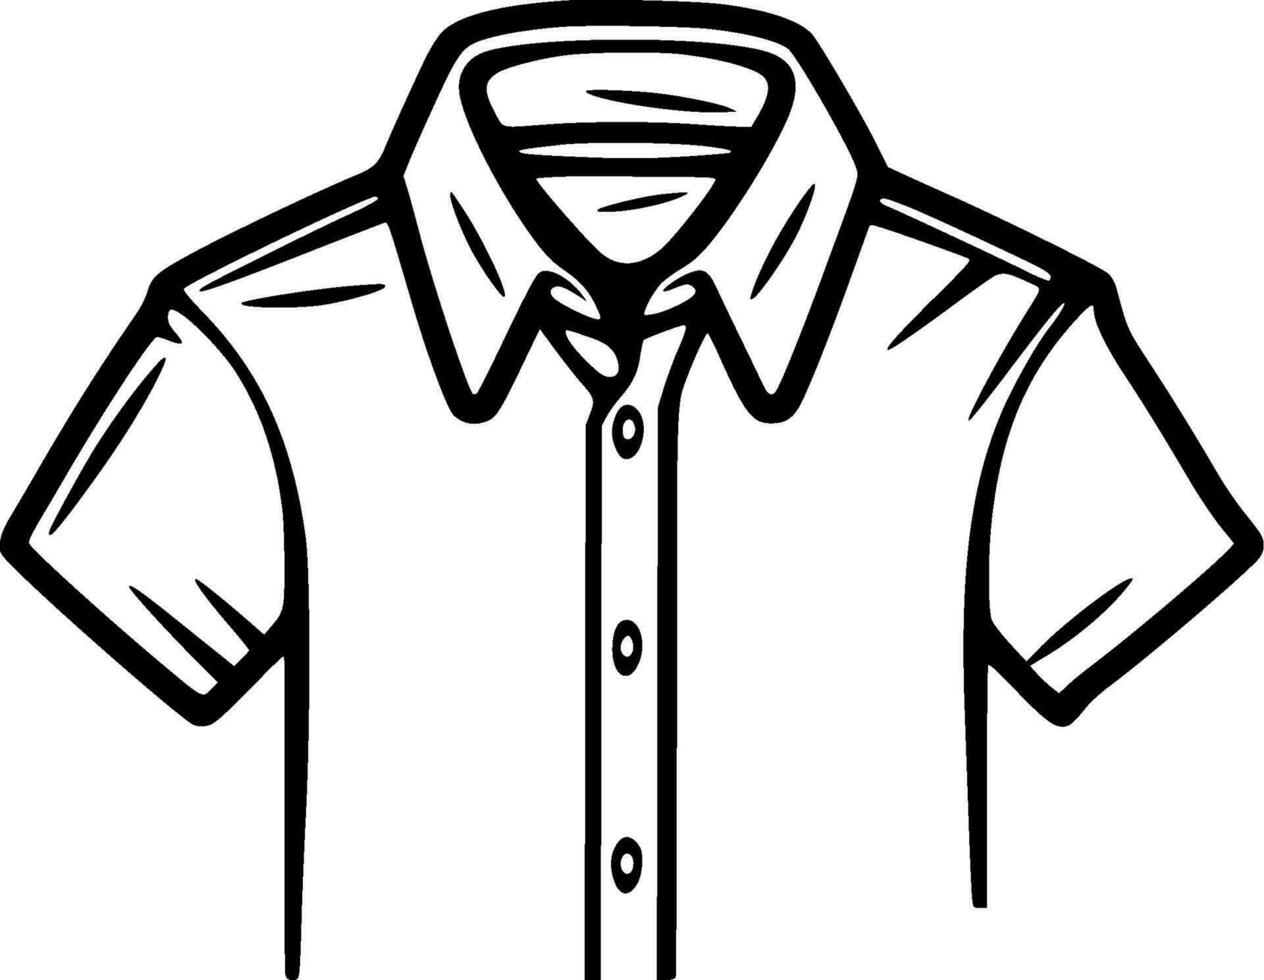 Shirt - High Quality Vector Logo - Vector illustration ideal for T-shirt graphic